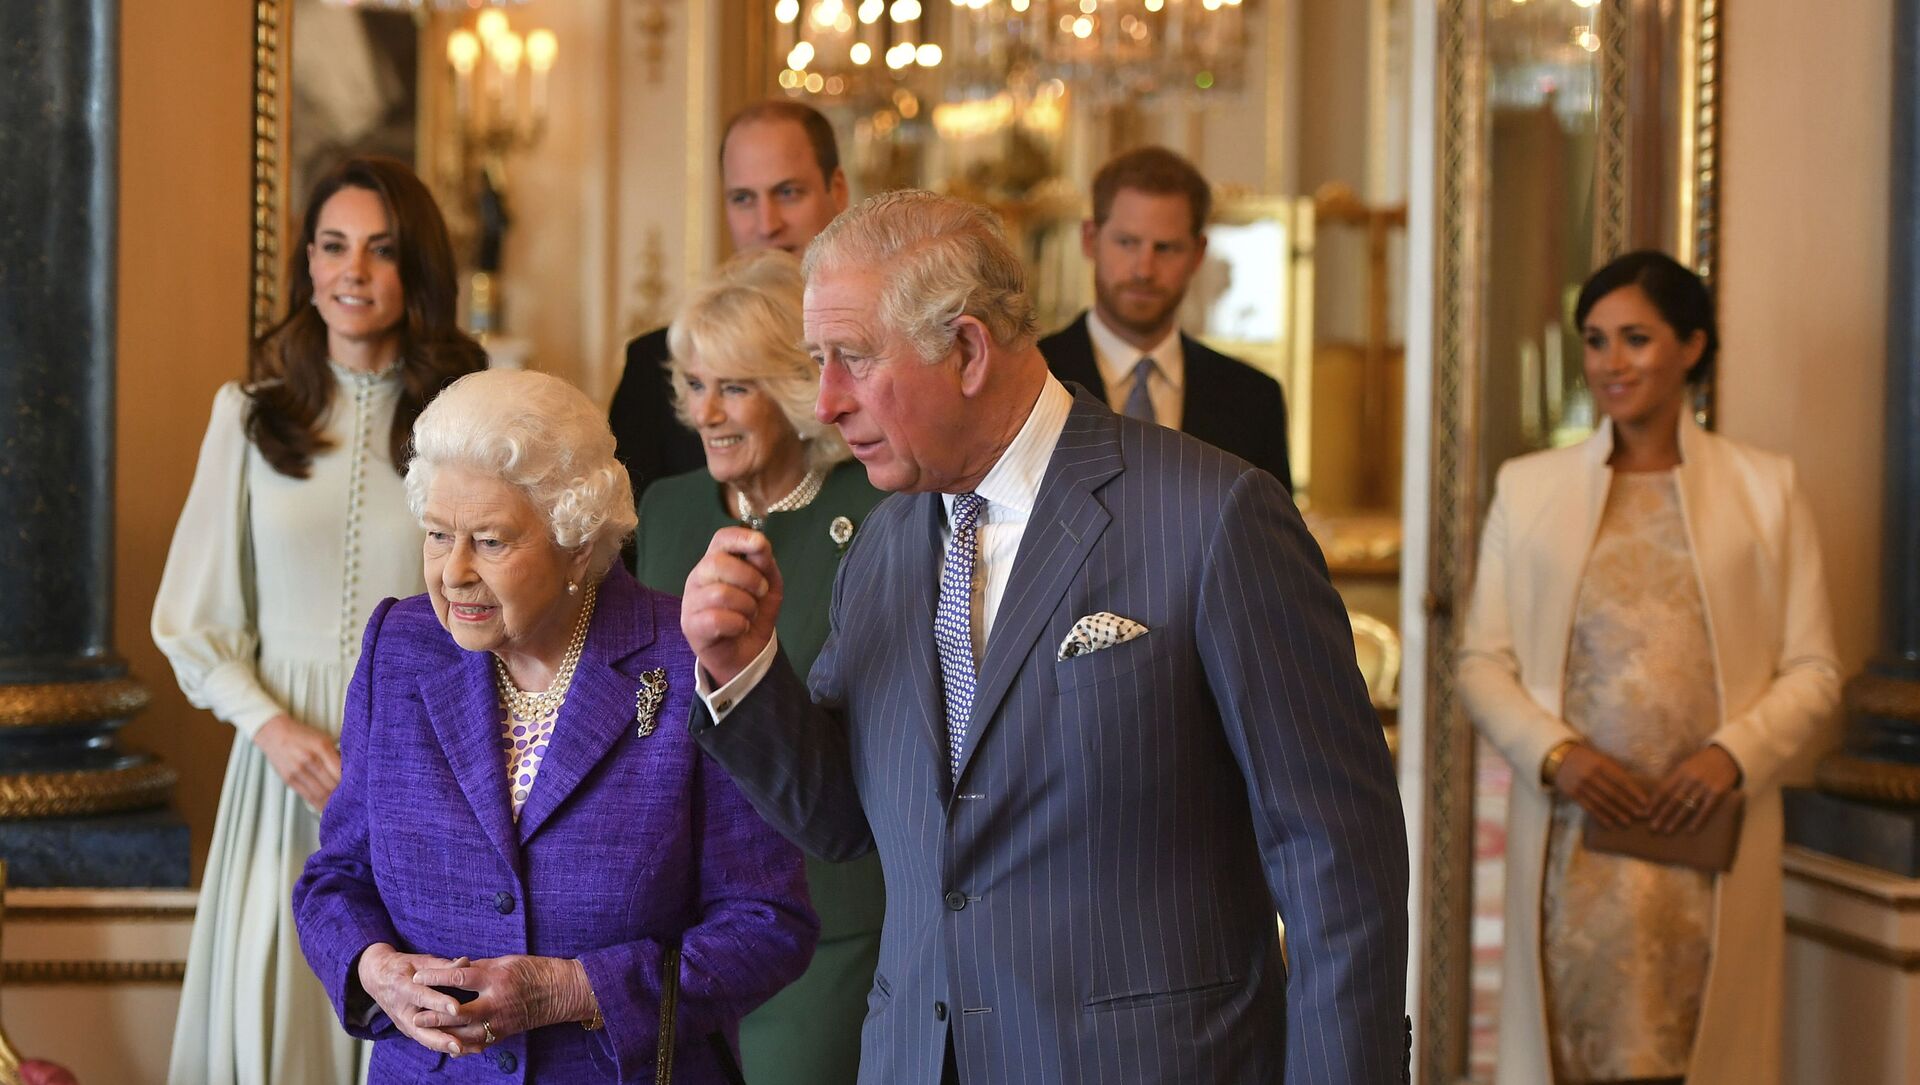 Queen Elizabeth II is joined by Prince Charles, the Prince of Wales, and at rear, from left, Kate, Duchess of Cambridge, Camilla, Duchess of Cornwall, Prince William, Prince Harry and Meghan, Duchess of Sussex during a reception at Buckingham Palace, London, Tuesday 5 March 2019, to mark the 50th anniversary of the investiture of the Prince of Wales. - Sputnik International, 1920, 22.02.2021